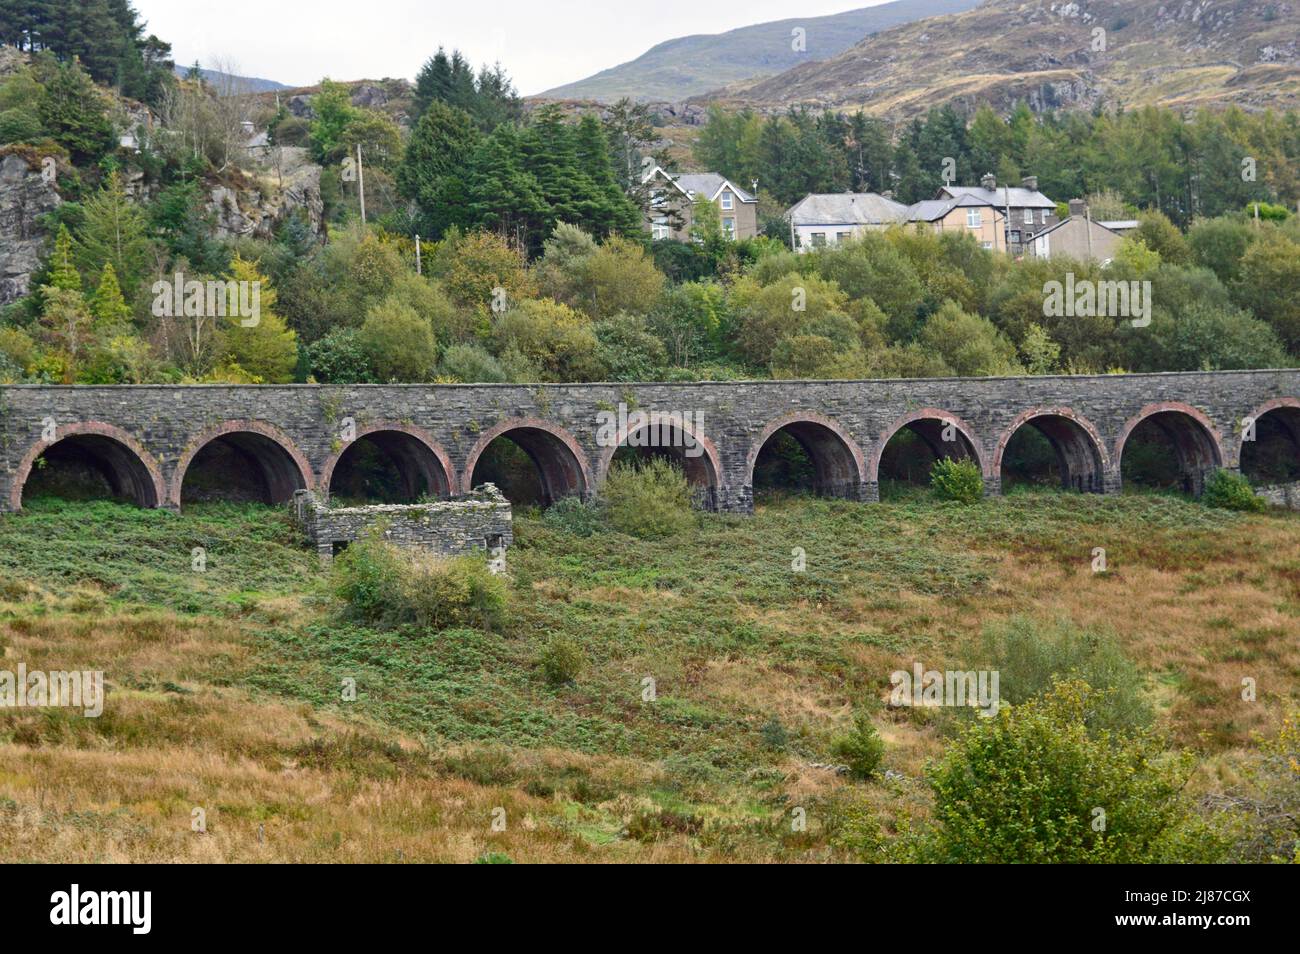 BLAENAU FESTINIOG. GWYNEDD. WALES. 10-16-21. The abandoned railway viaduct which used to carry the currently out of use branch line to Trawsfynydd. Stock Photo